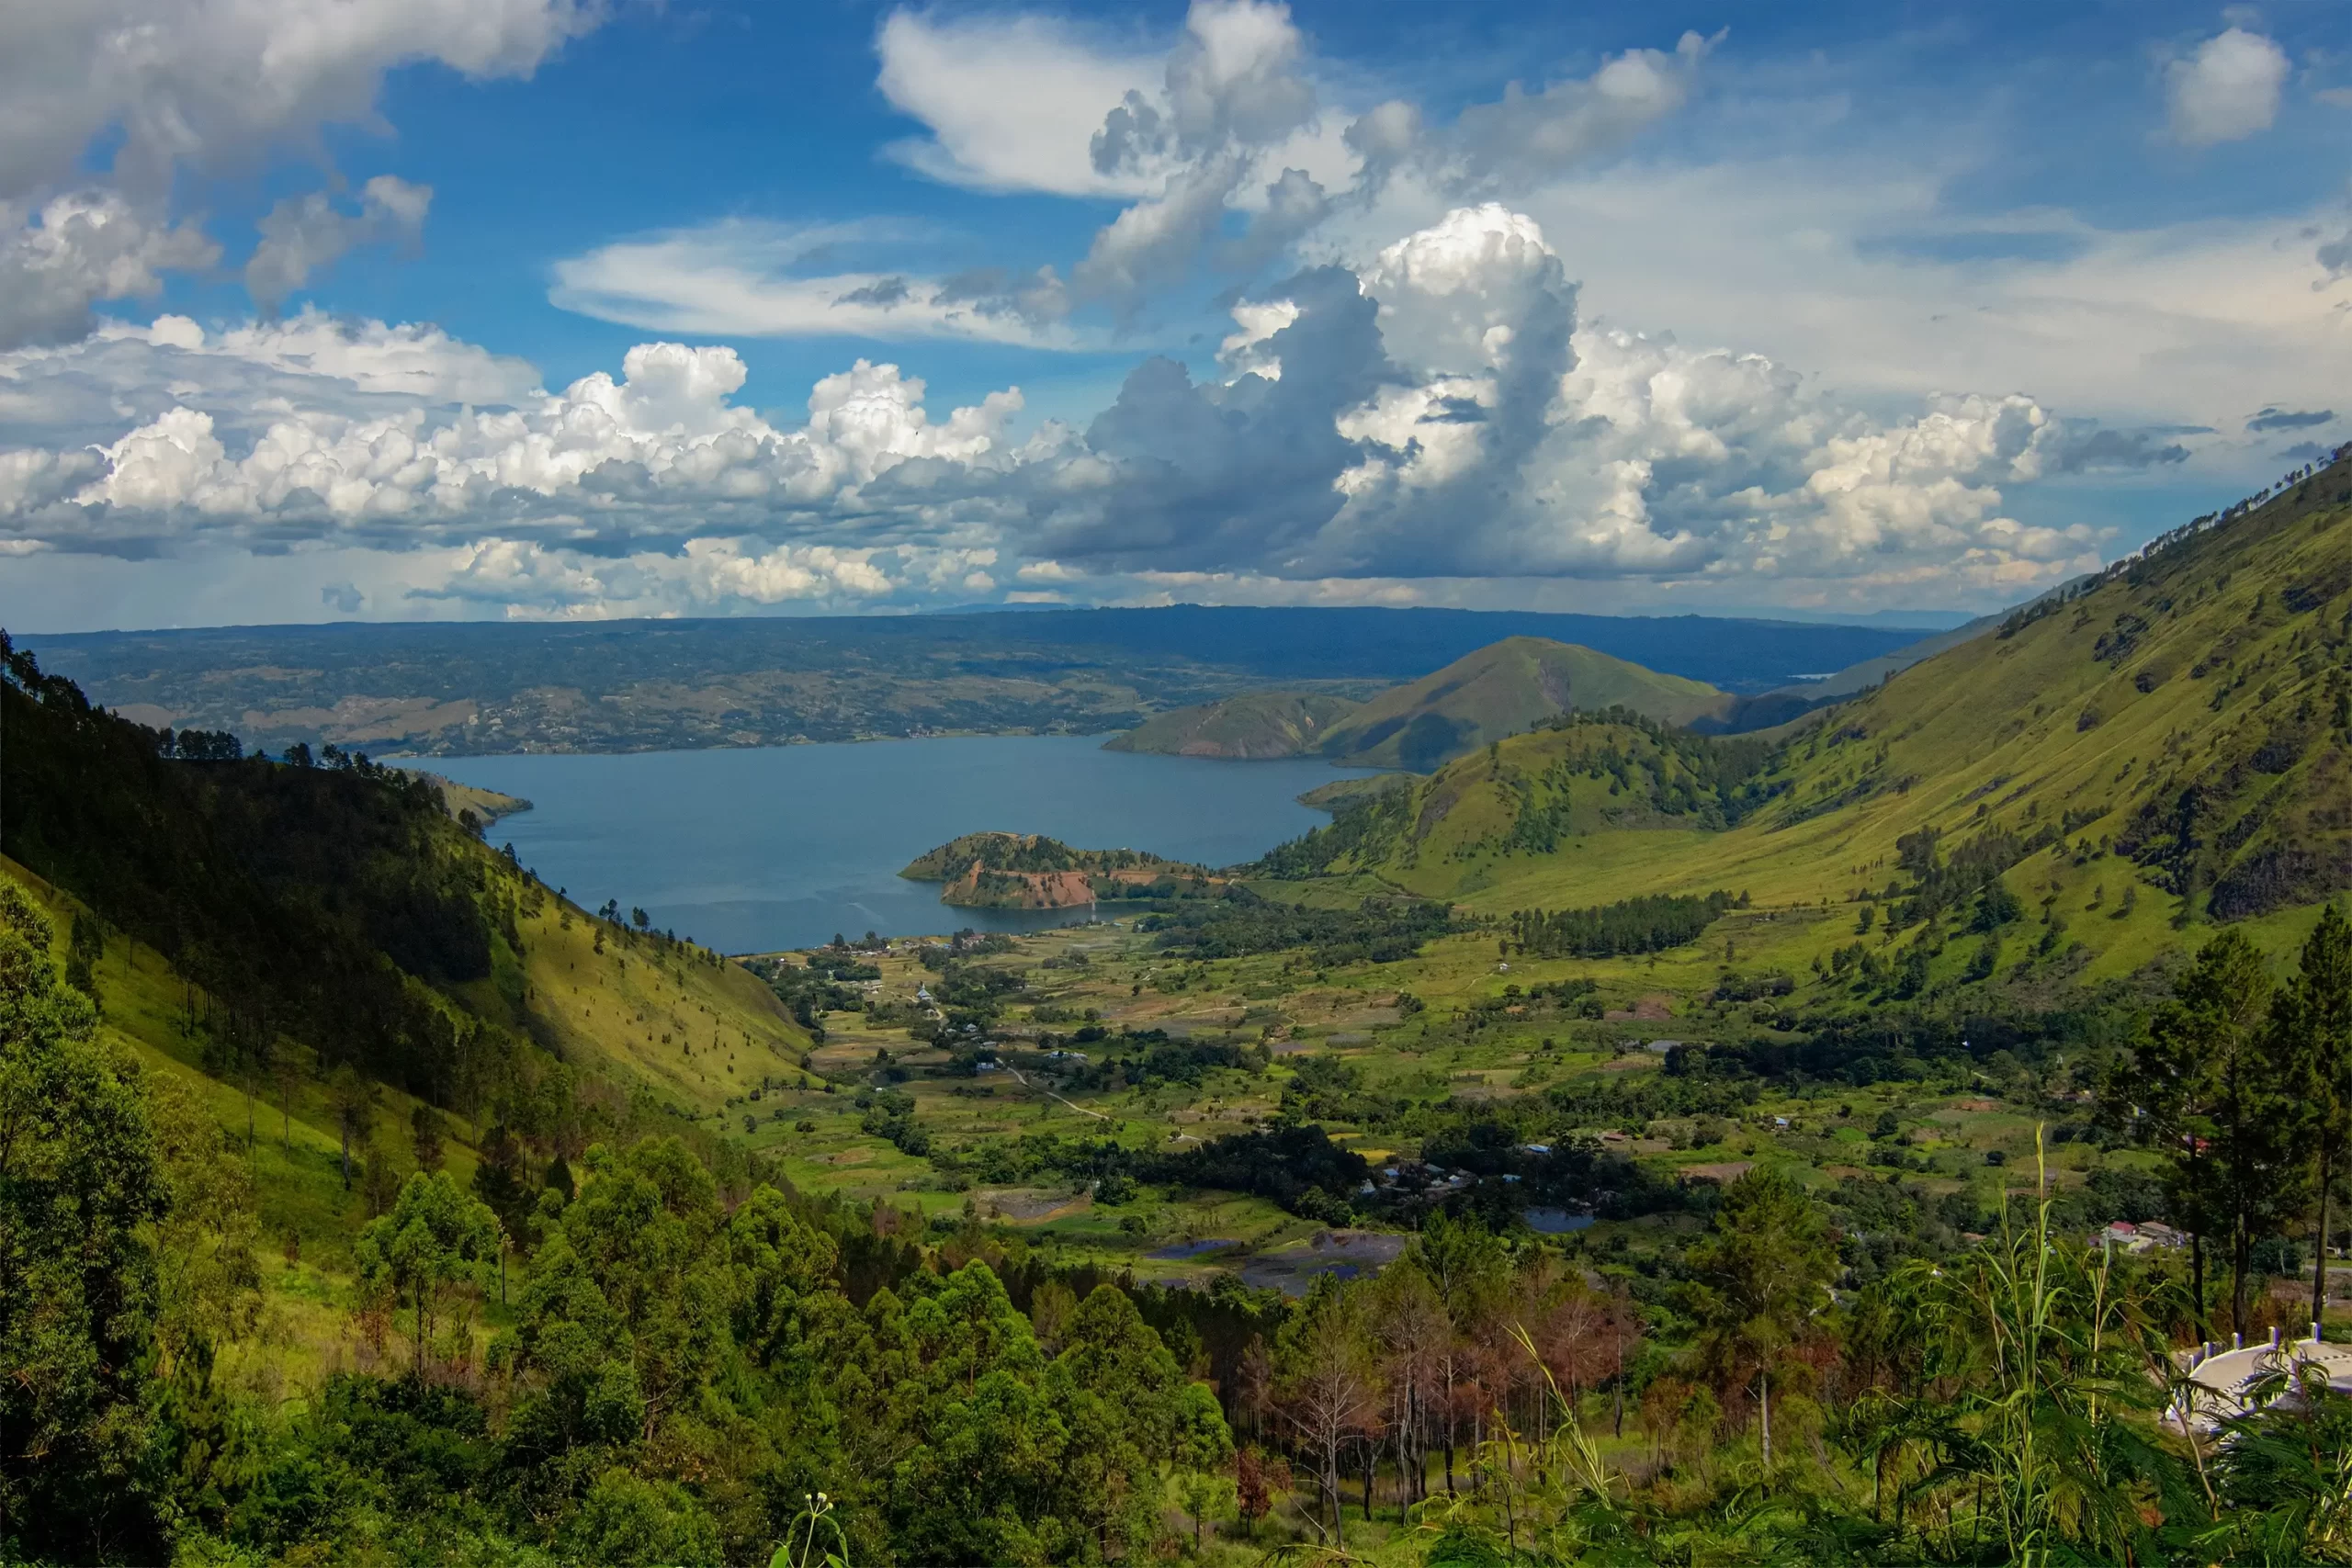 A panoramic view of Lake Toba, showcasing its turquoise waters and surrounding lush green mountains.